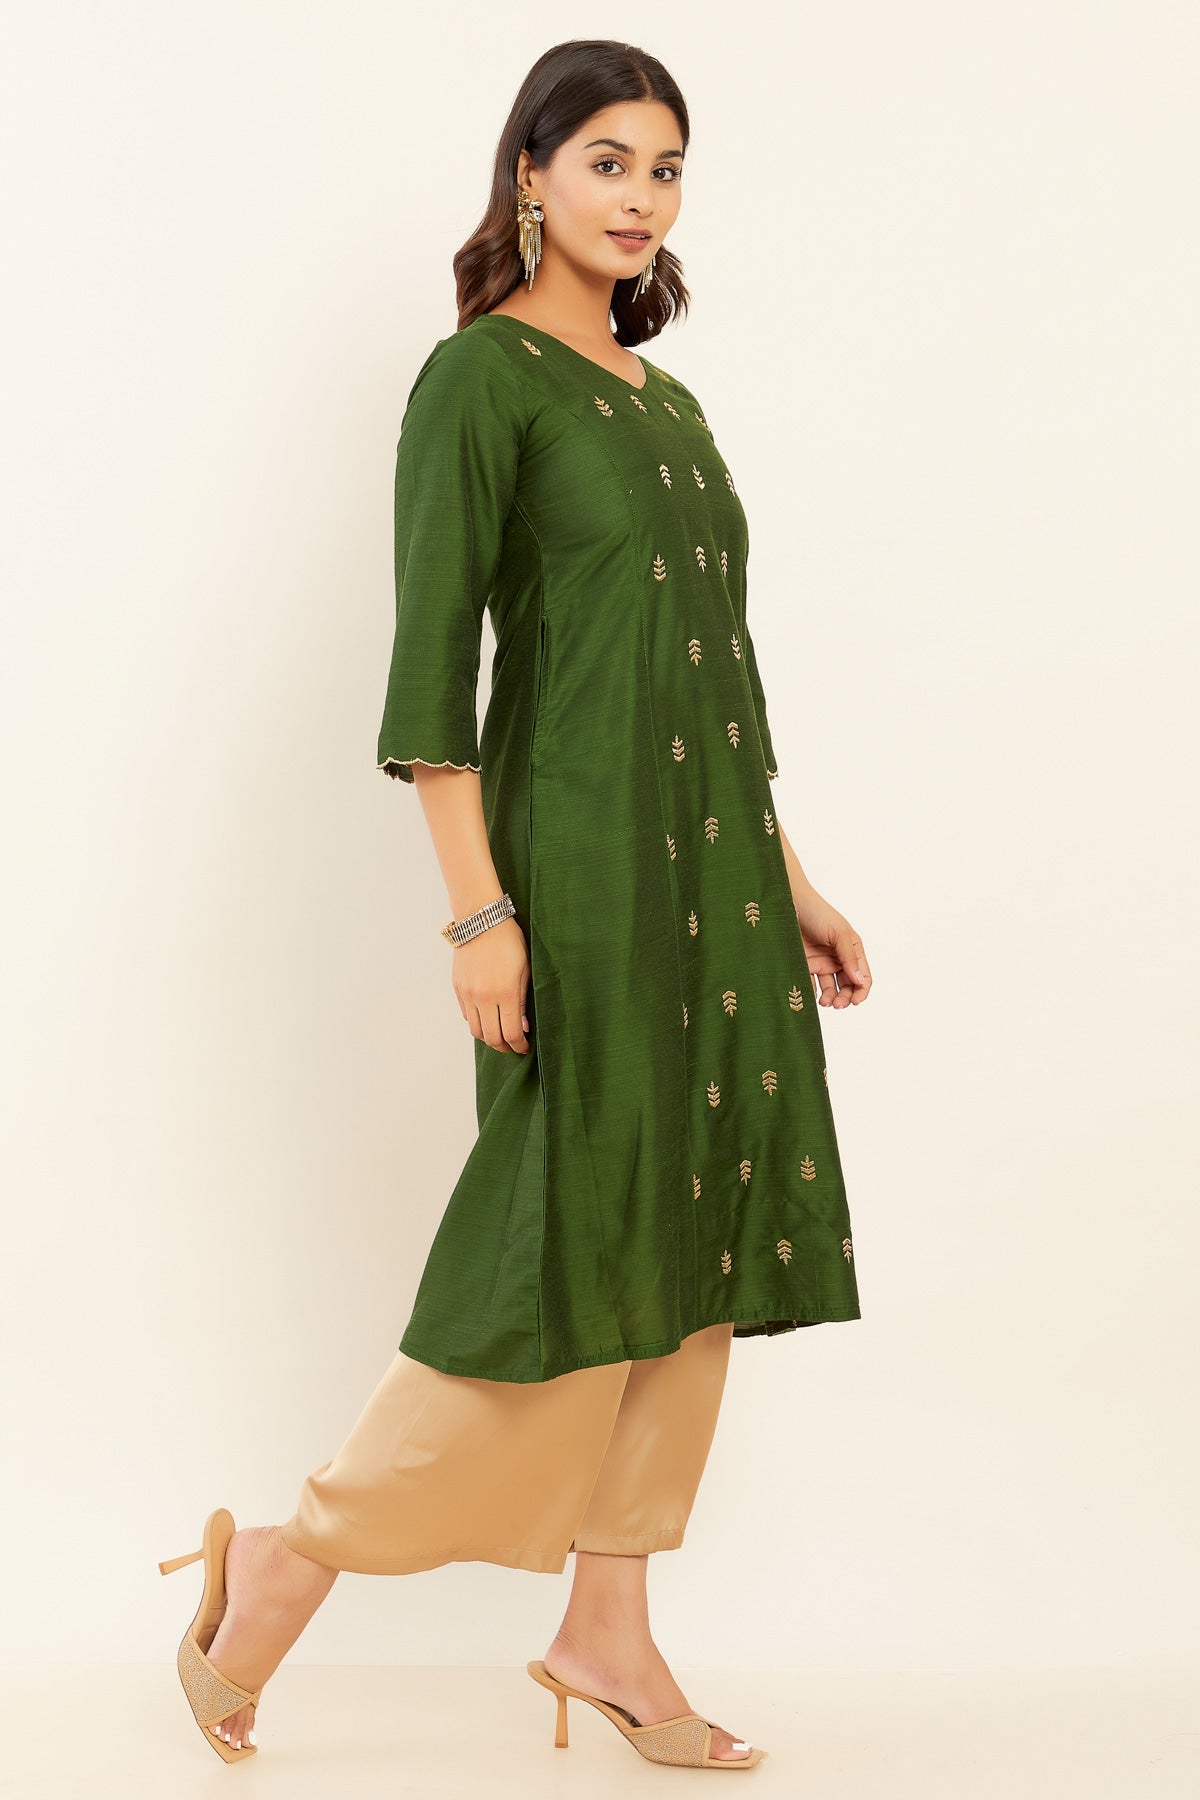 Embroidered Chanderi Cotton Pakistani Suit in Dusty Green : KHF100